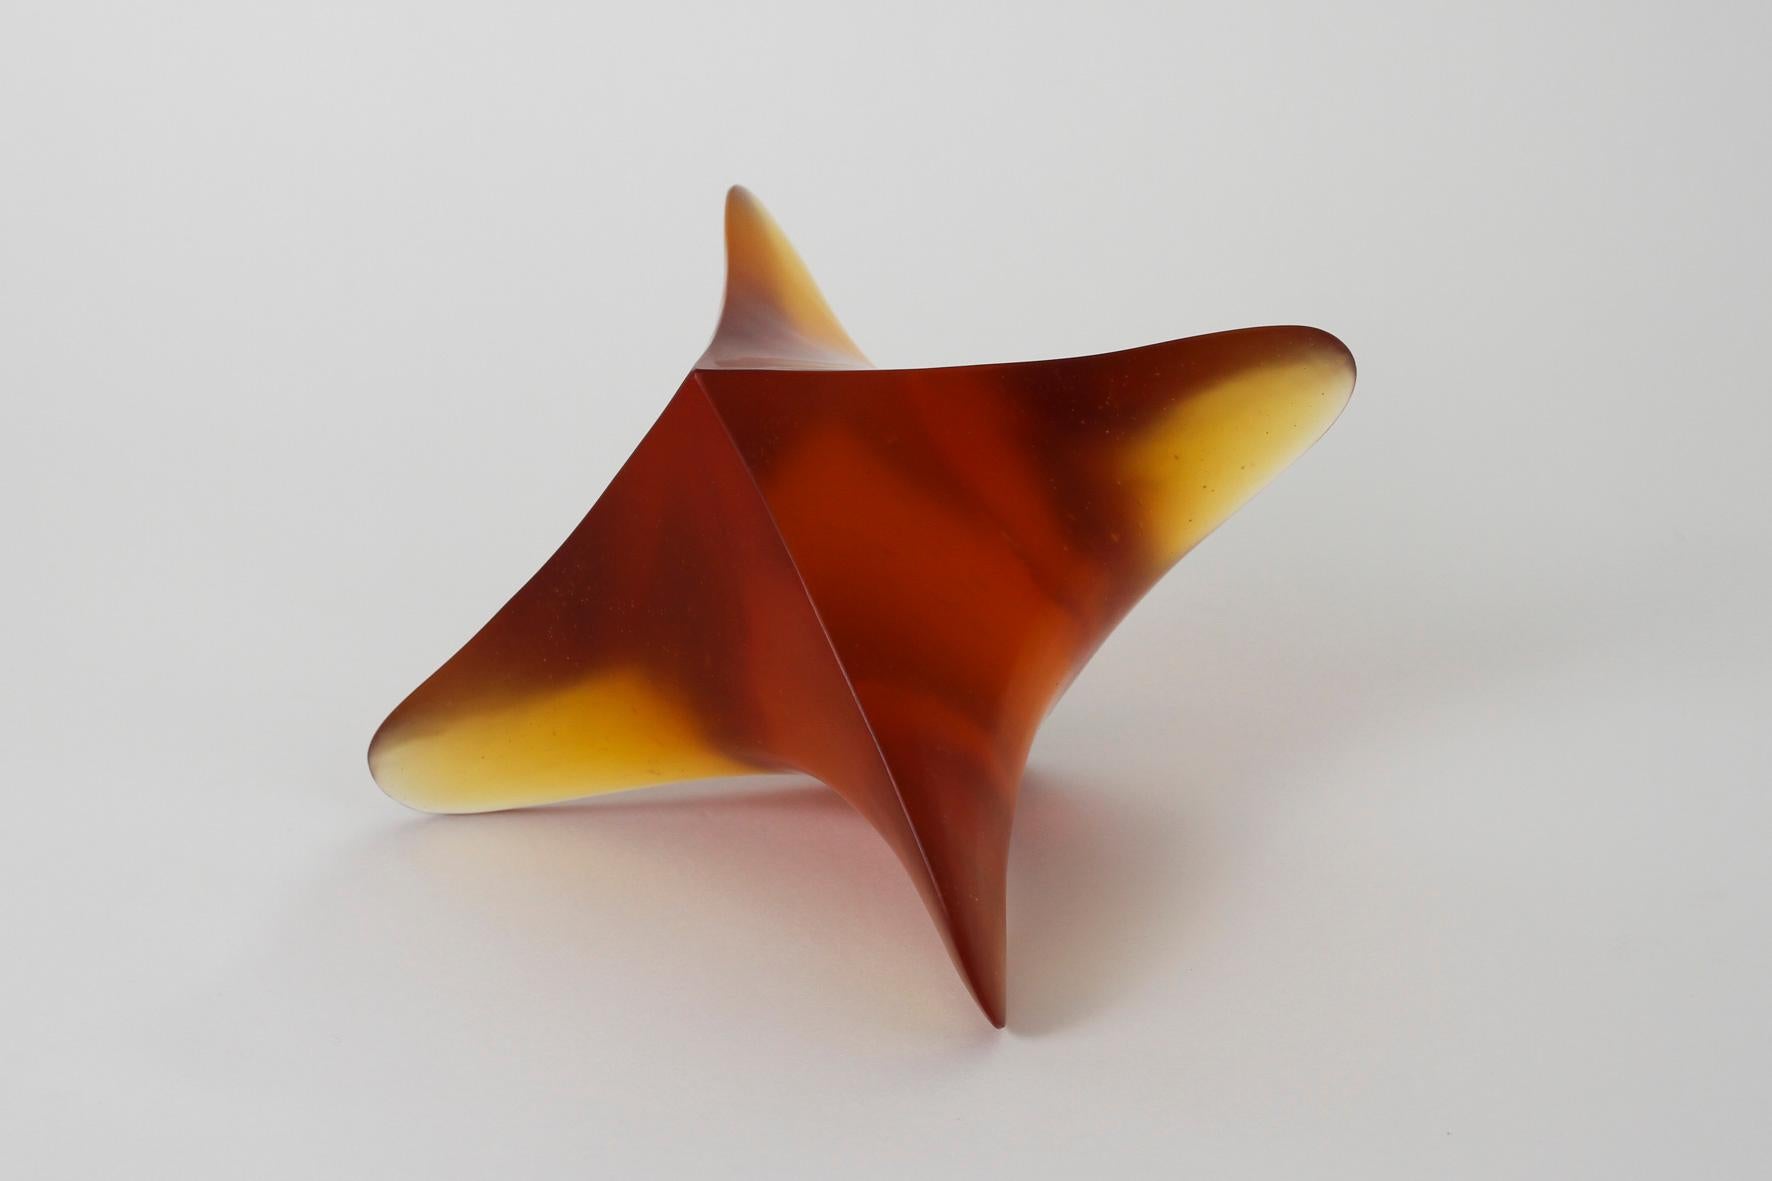 Original artwork by Robyn Campbell.
Whorl 1, cast & cut lead crystal glass, 11cm x 15cm x 14cm (d), 2023
Simplicity, line, material, surface, and form are the focus of Robyn Campbell’s art practice. In this exhibition she uses various mediums, along